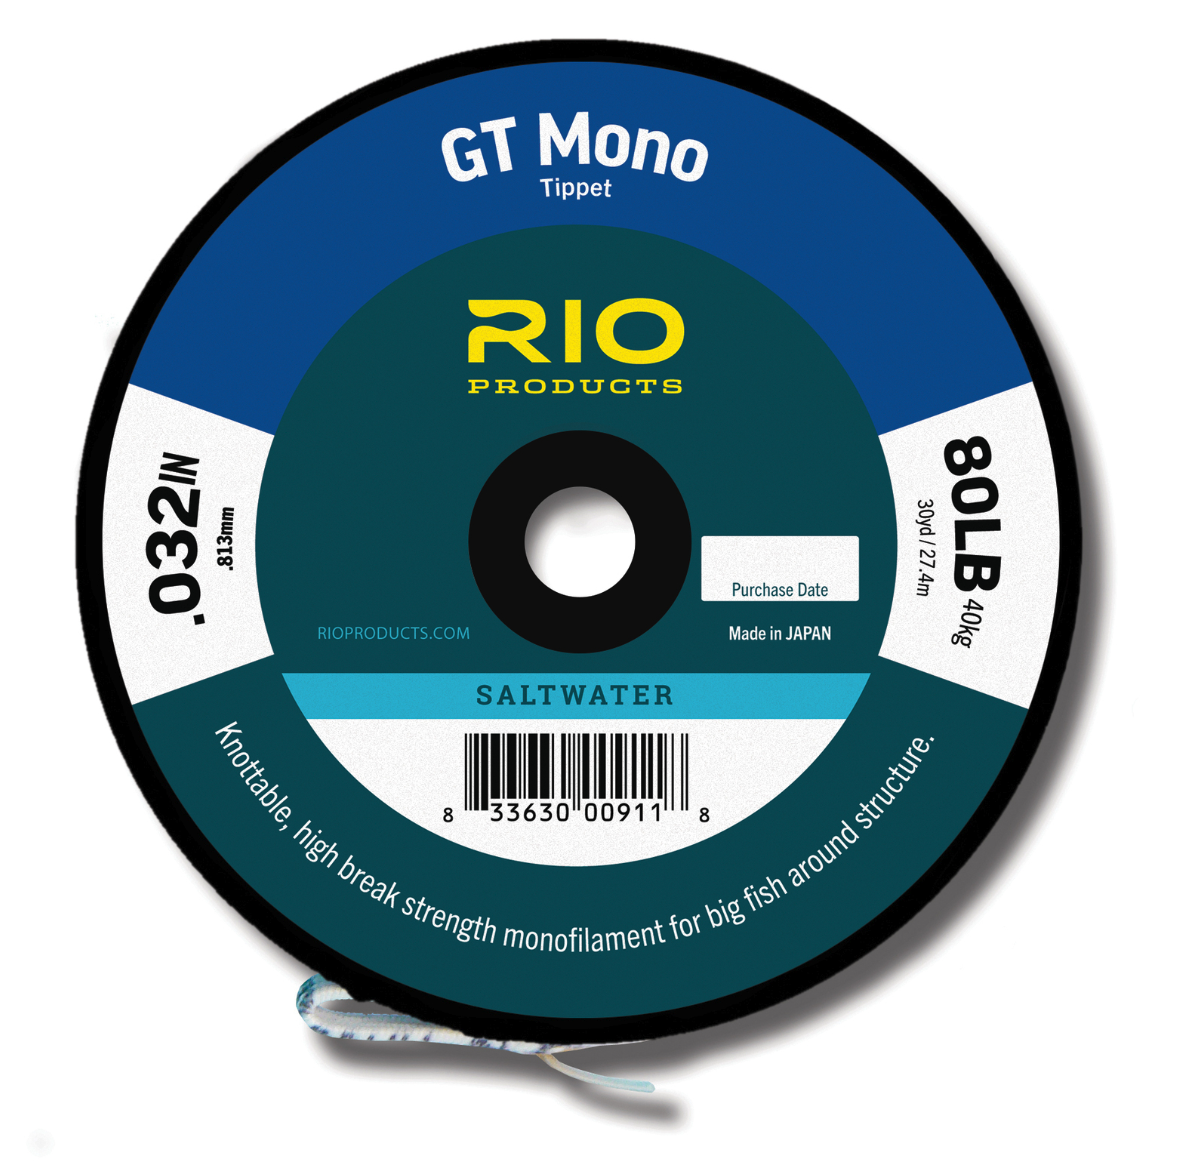 Buy RIO GT Mono Tippet online for fly fishing GTs.